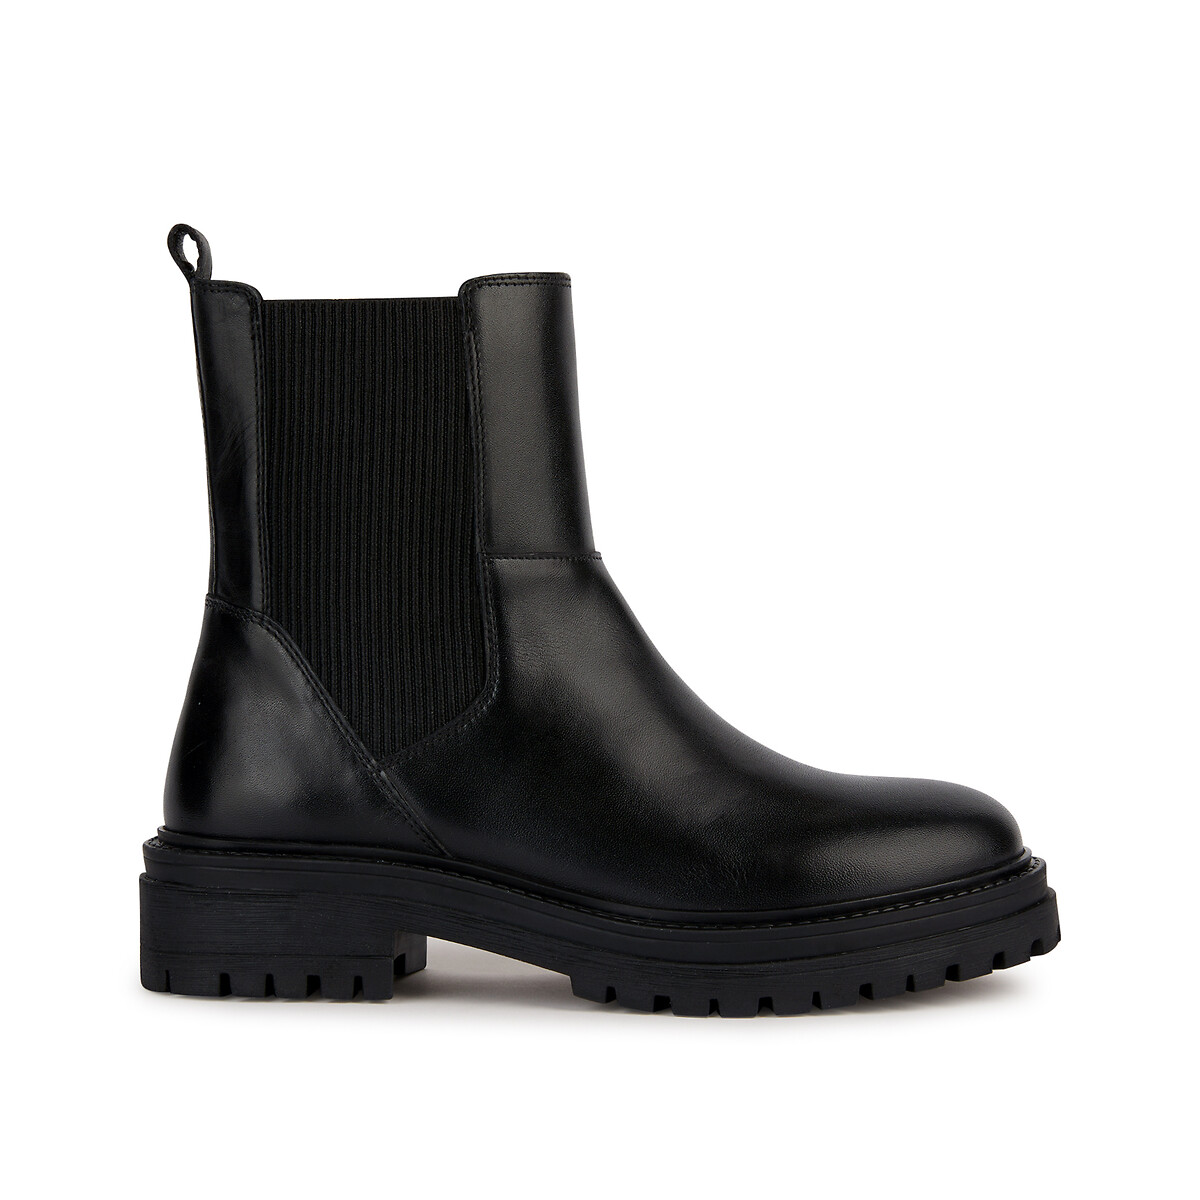 Iridea Breathable Chelsea Boots in Leather